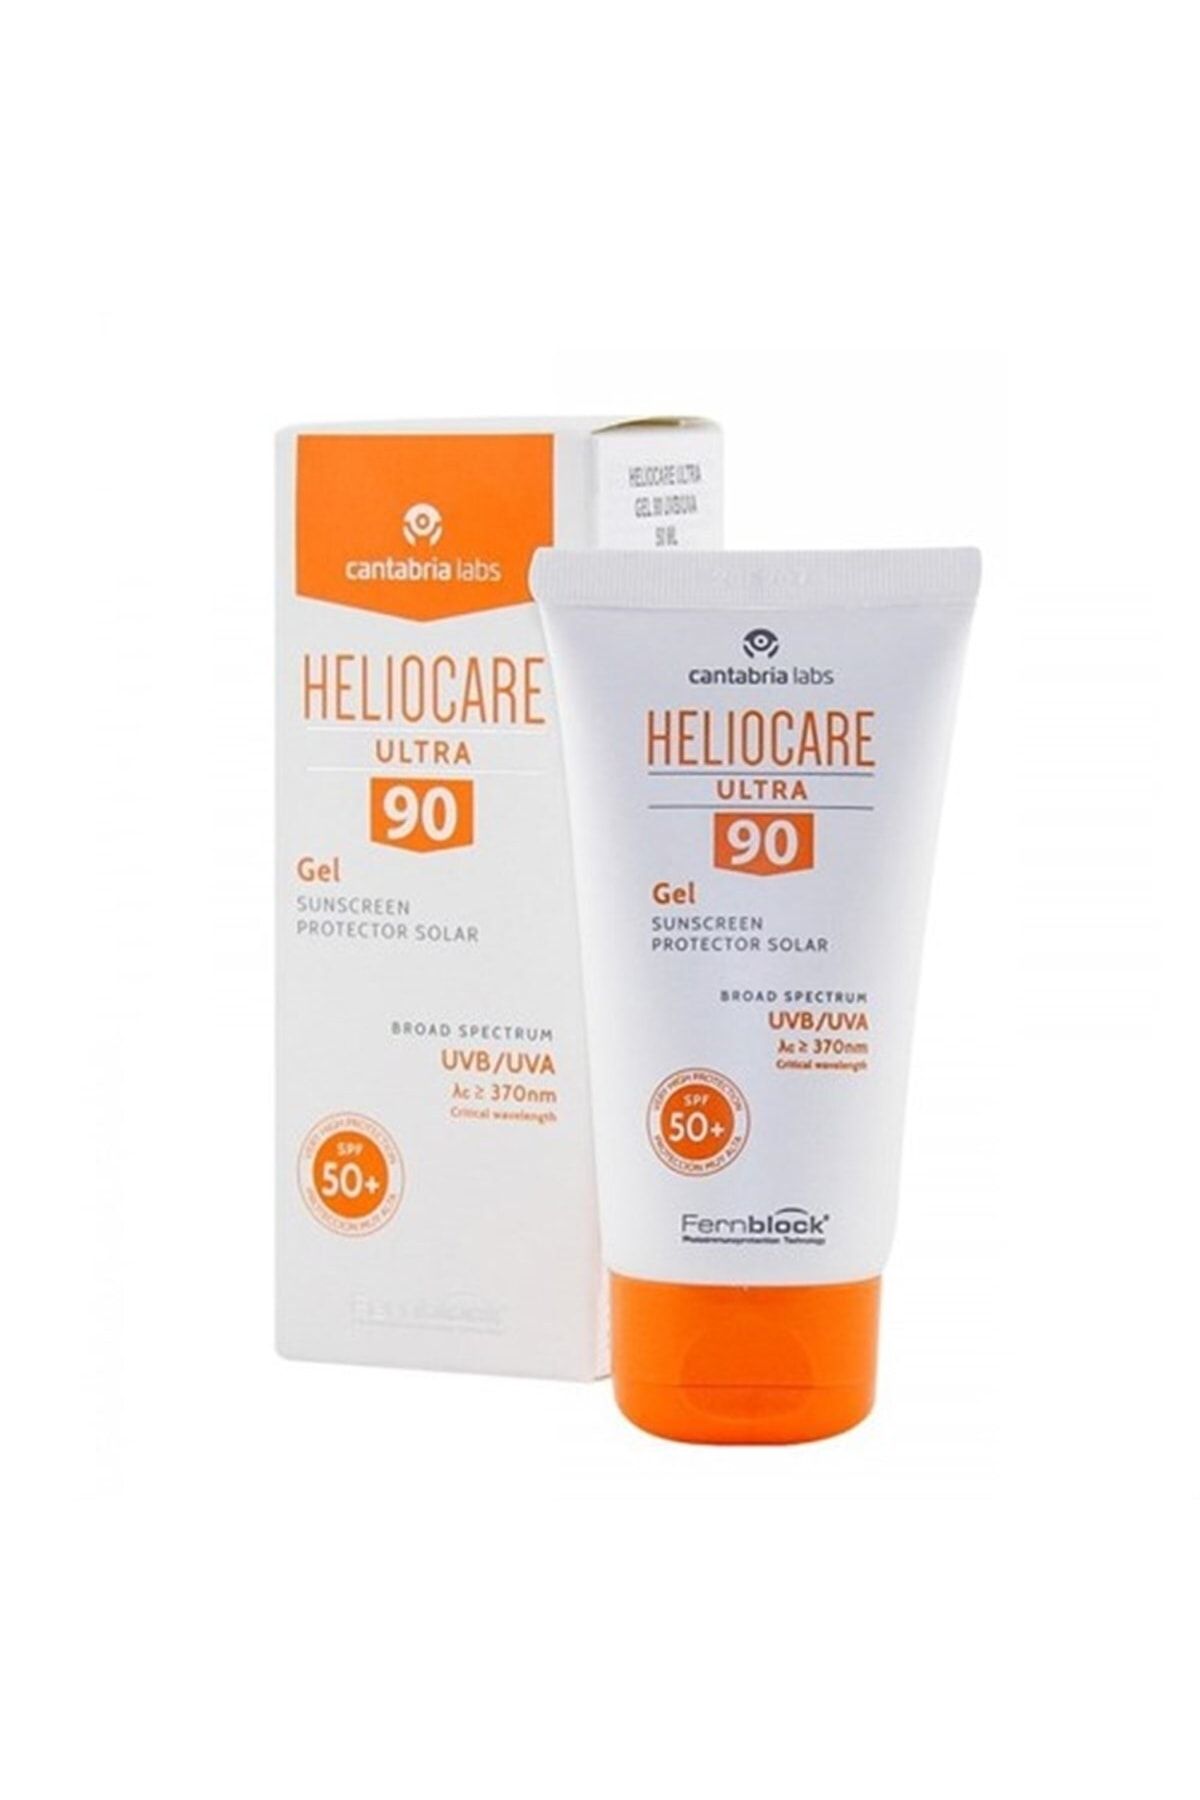 Heliocare Ultra Protection Gel 90 Uvb/uva 50ml